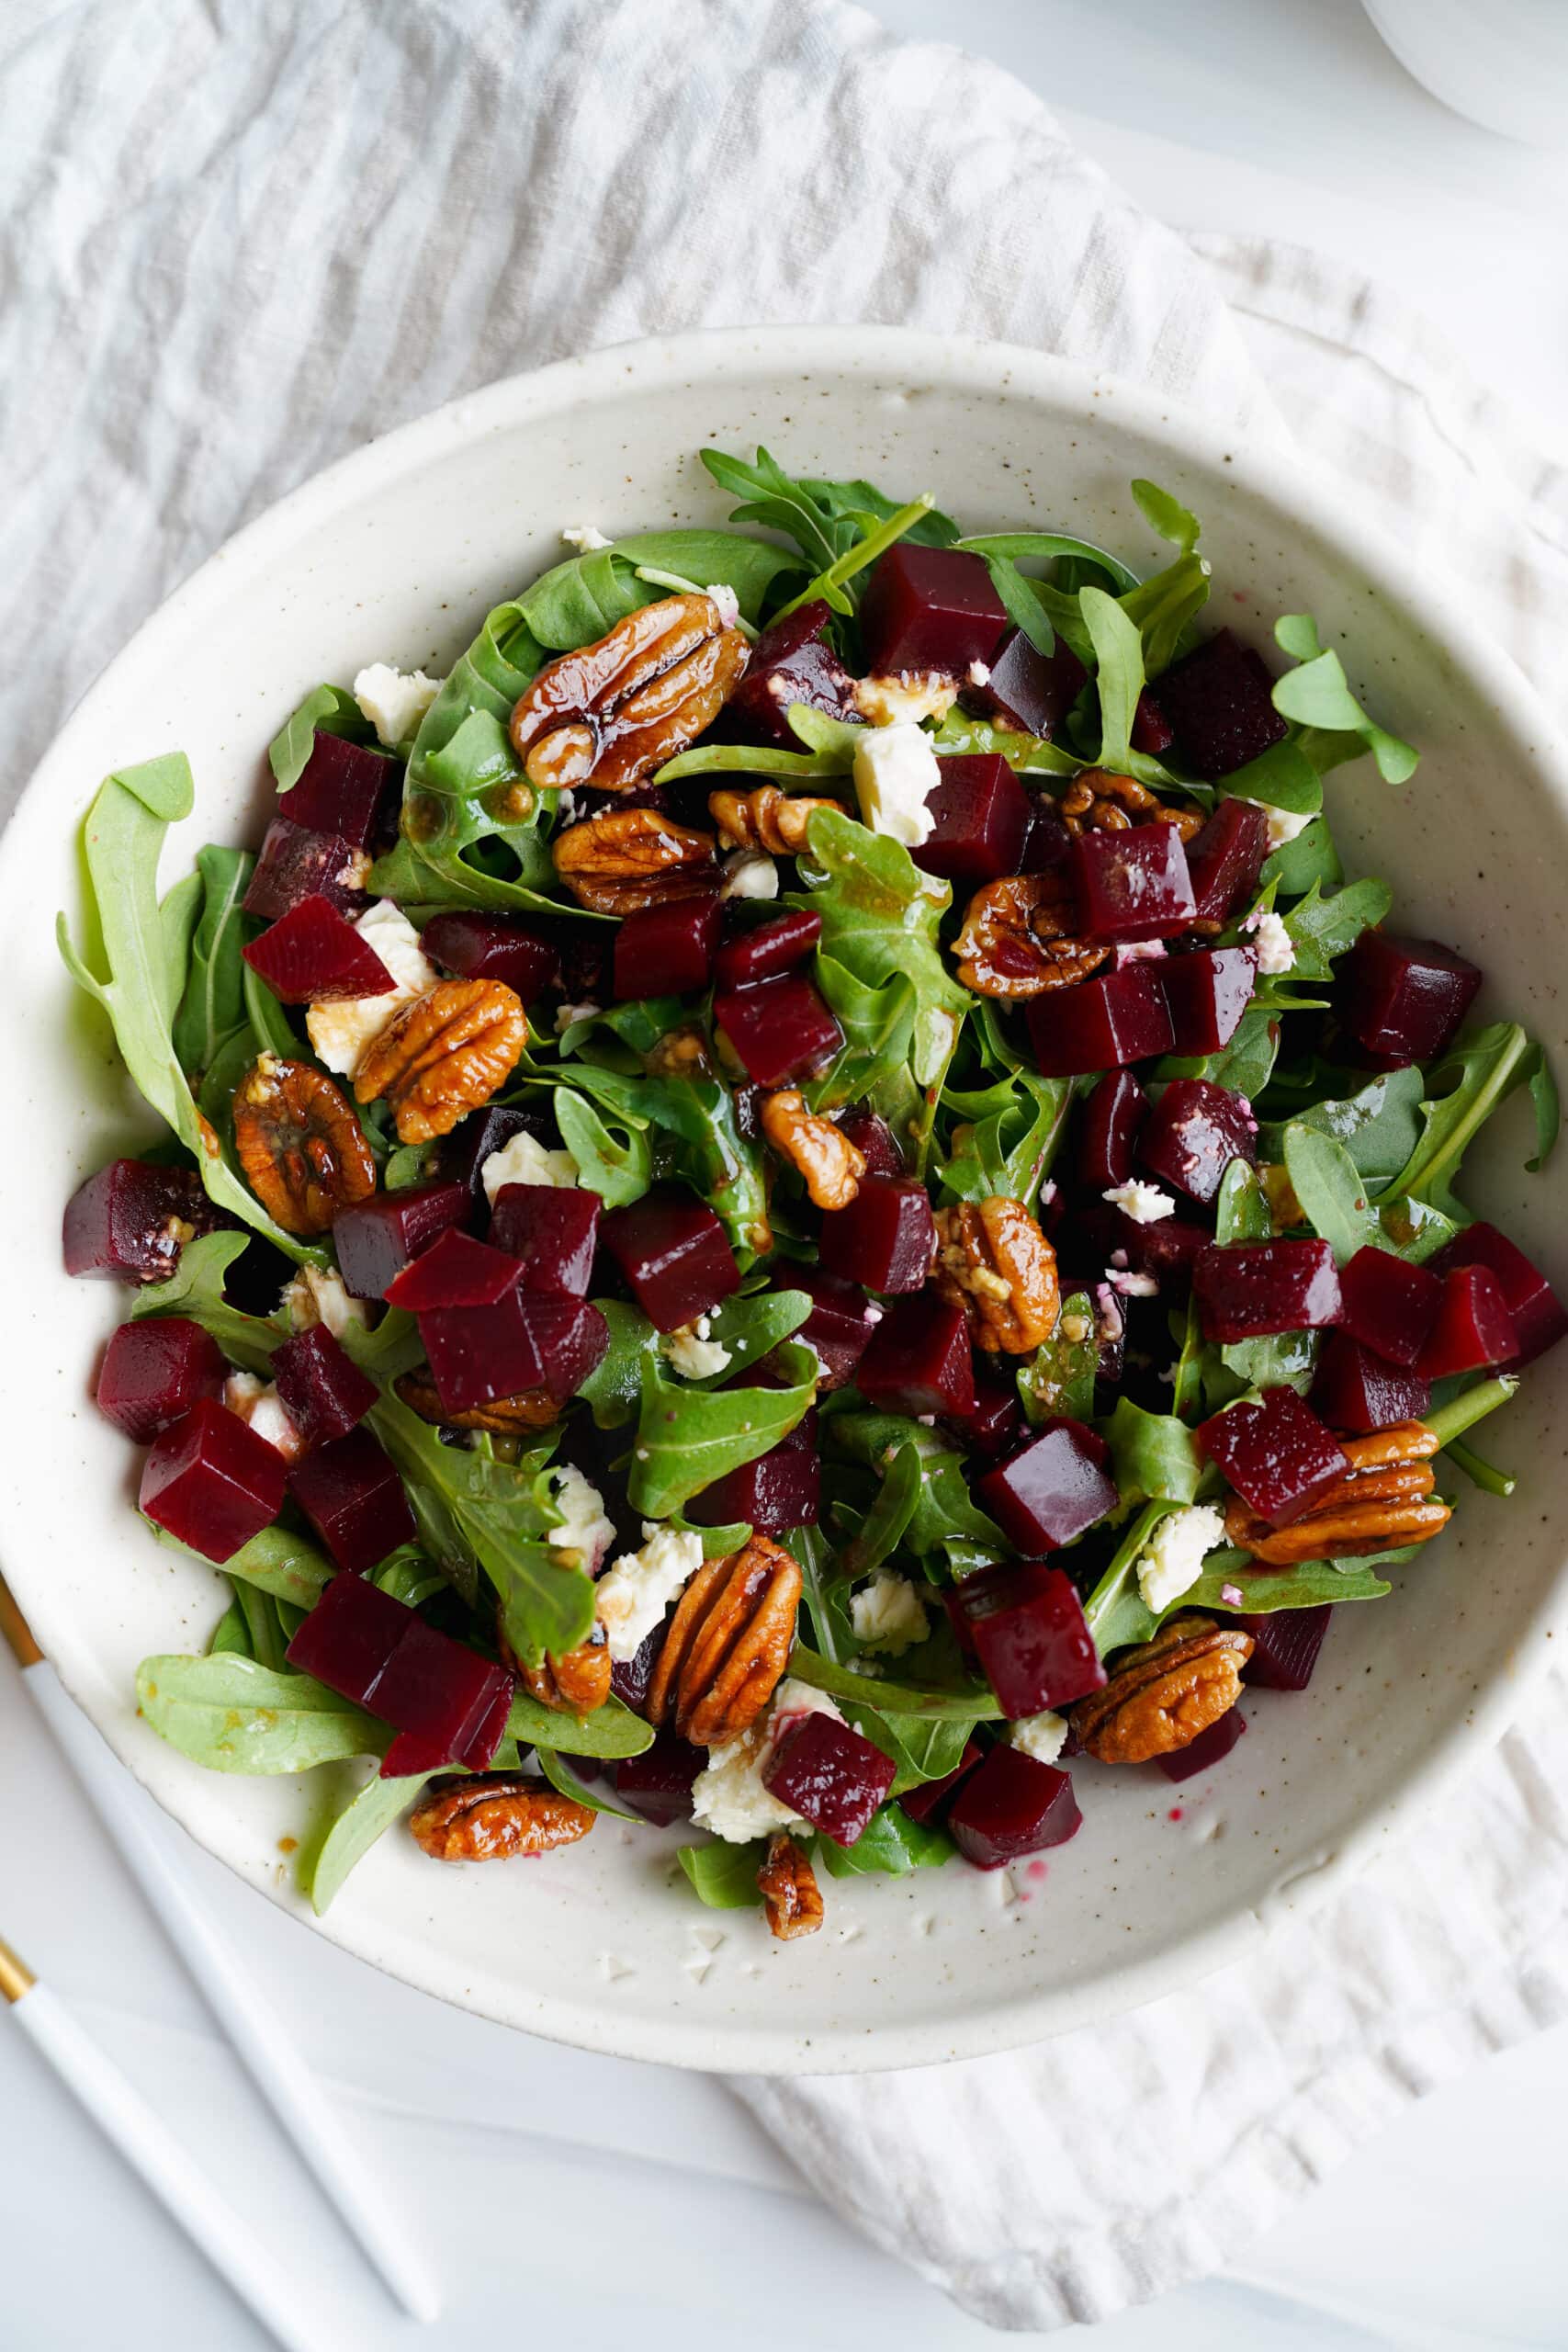 Arugula Beet Feta Salad with Candied Pecans ingredients | cookingwithcassandra.com